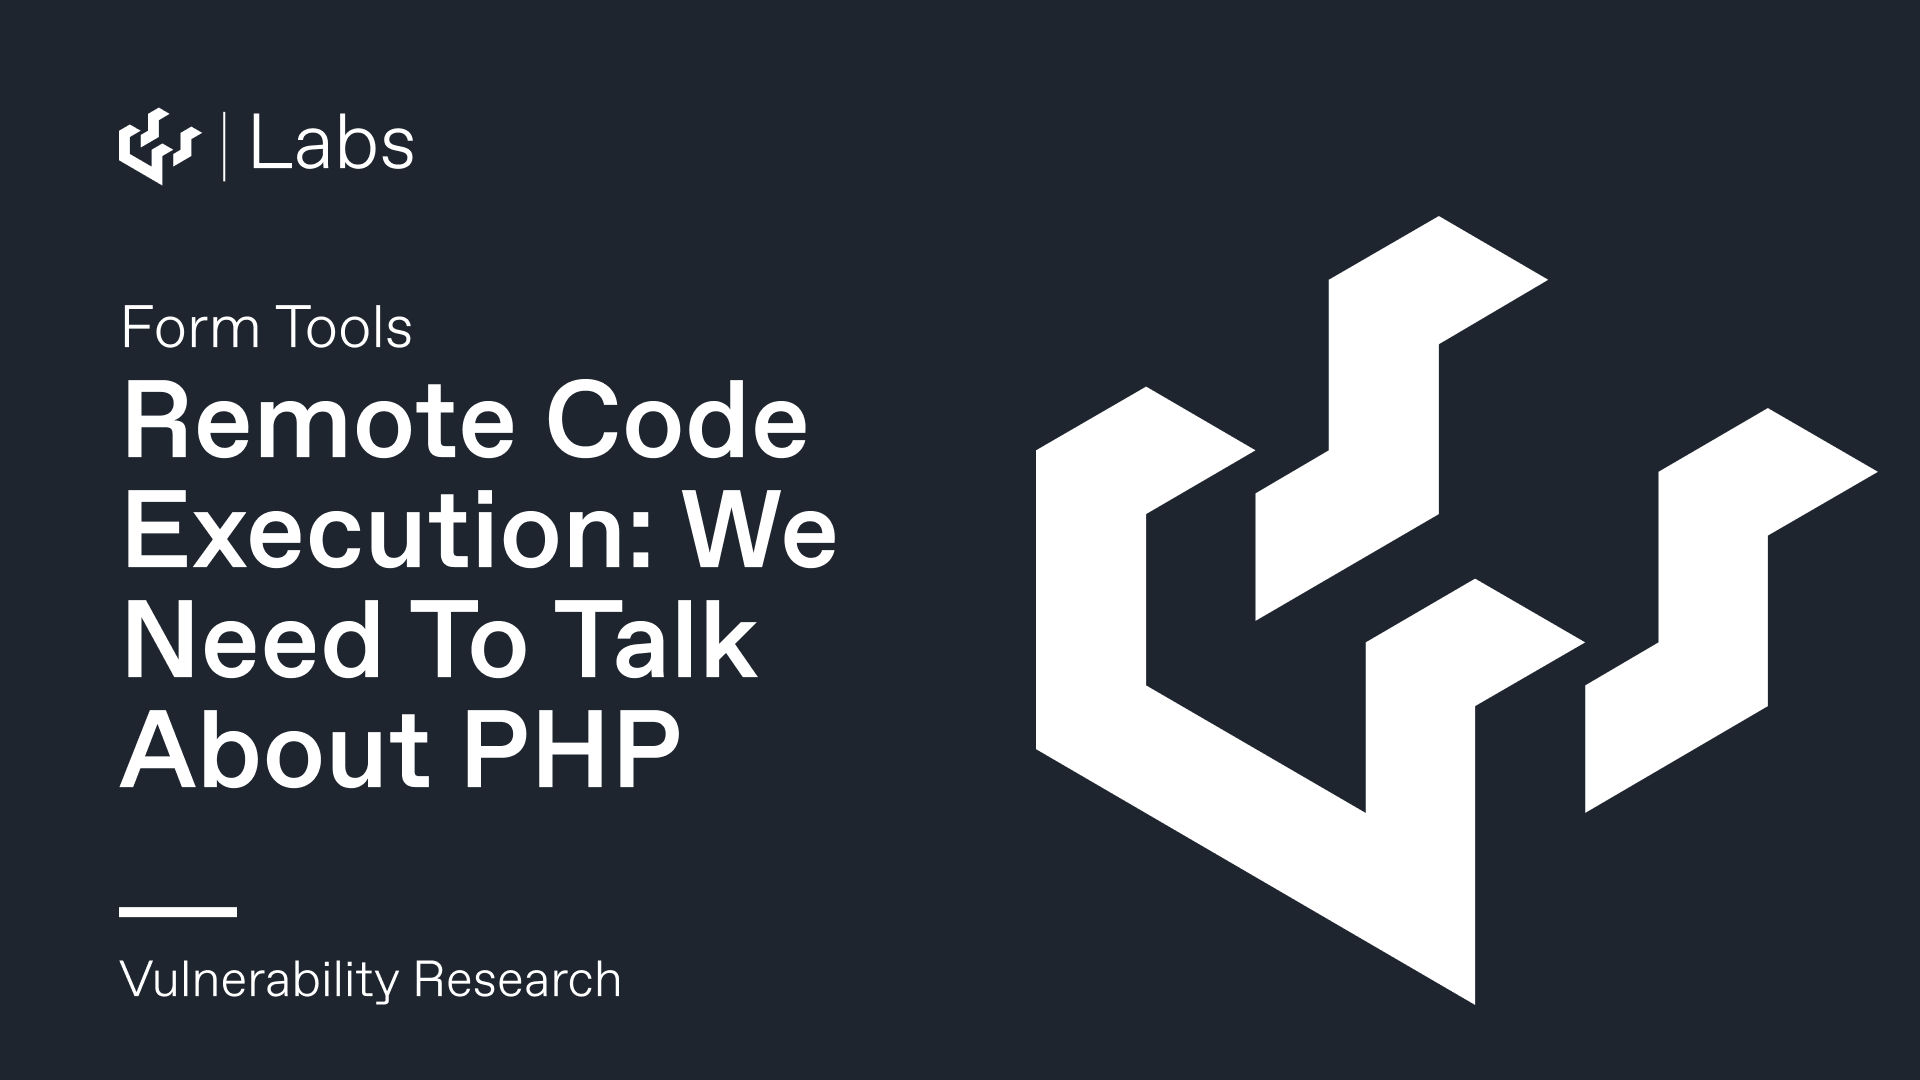 Form Tools Remote Code Execution: We Need To Talk About PHP